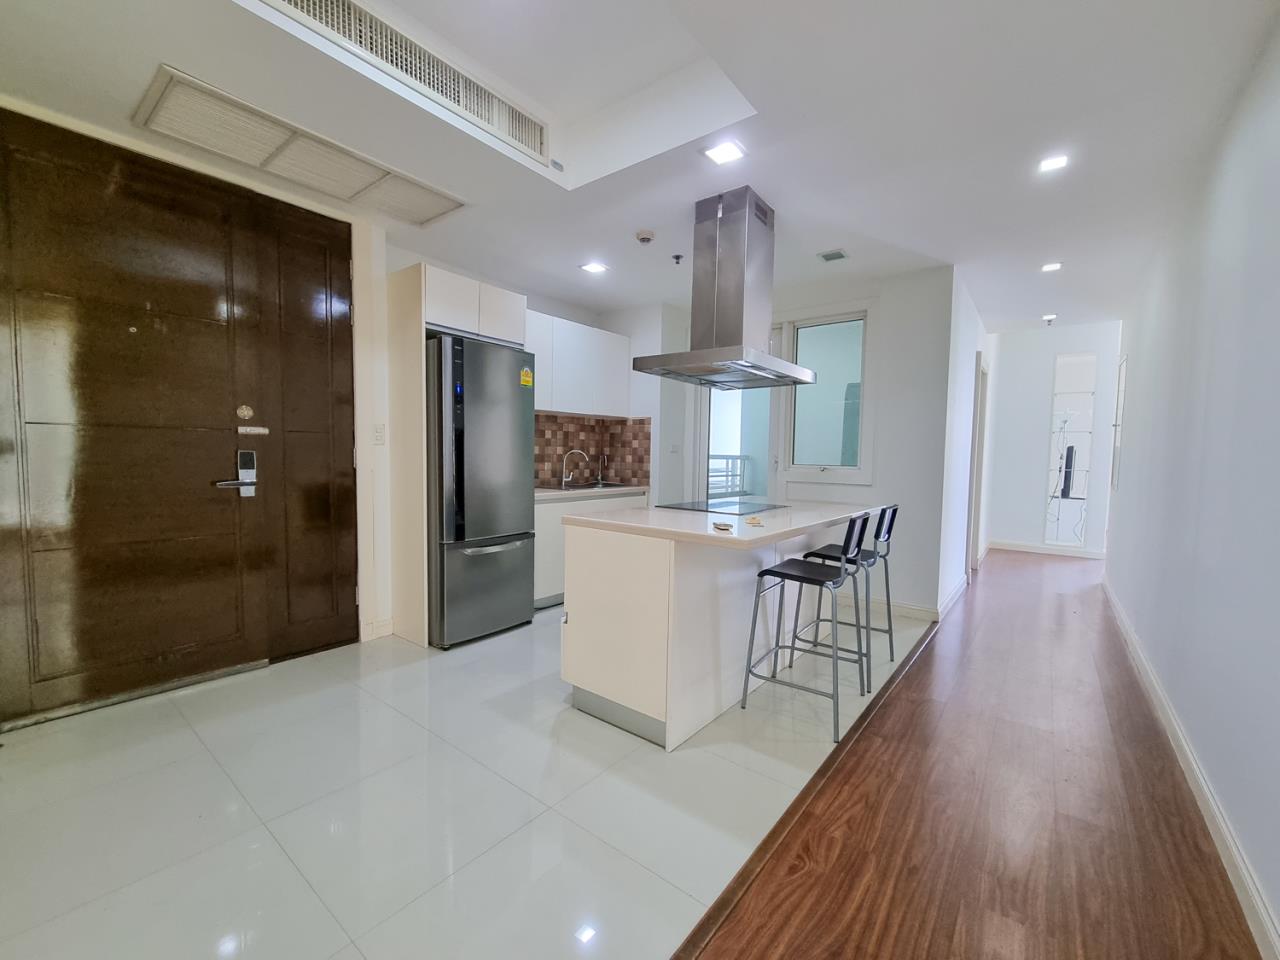 Japanthai Property Agency's *Siri Residence* Huge terrace rare 110sqm 2bed in Phrom Phong area  (5 mins walk to BTS PhromPhong)* 17